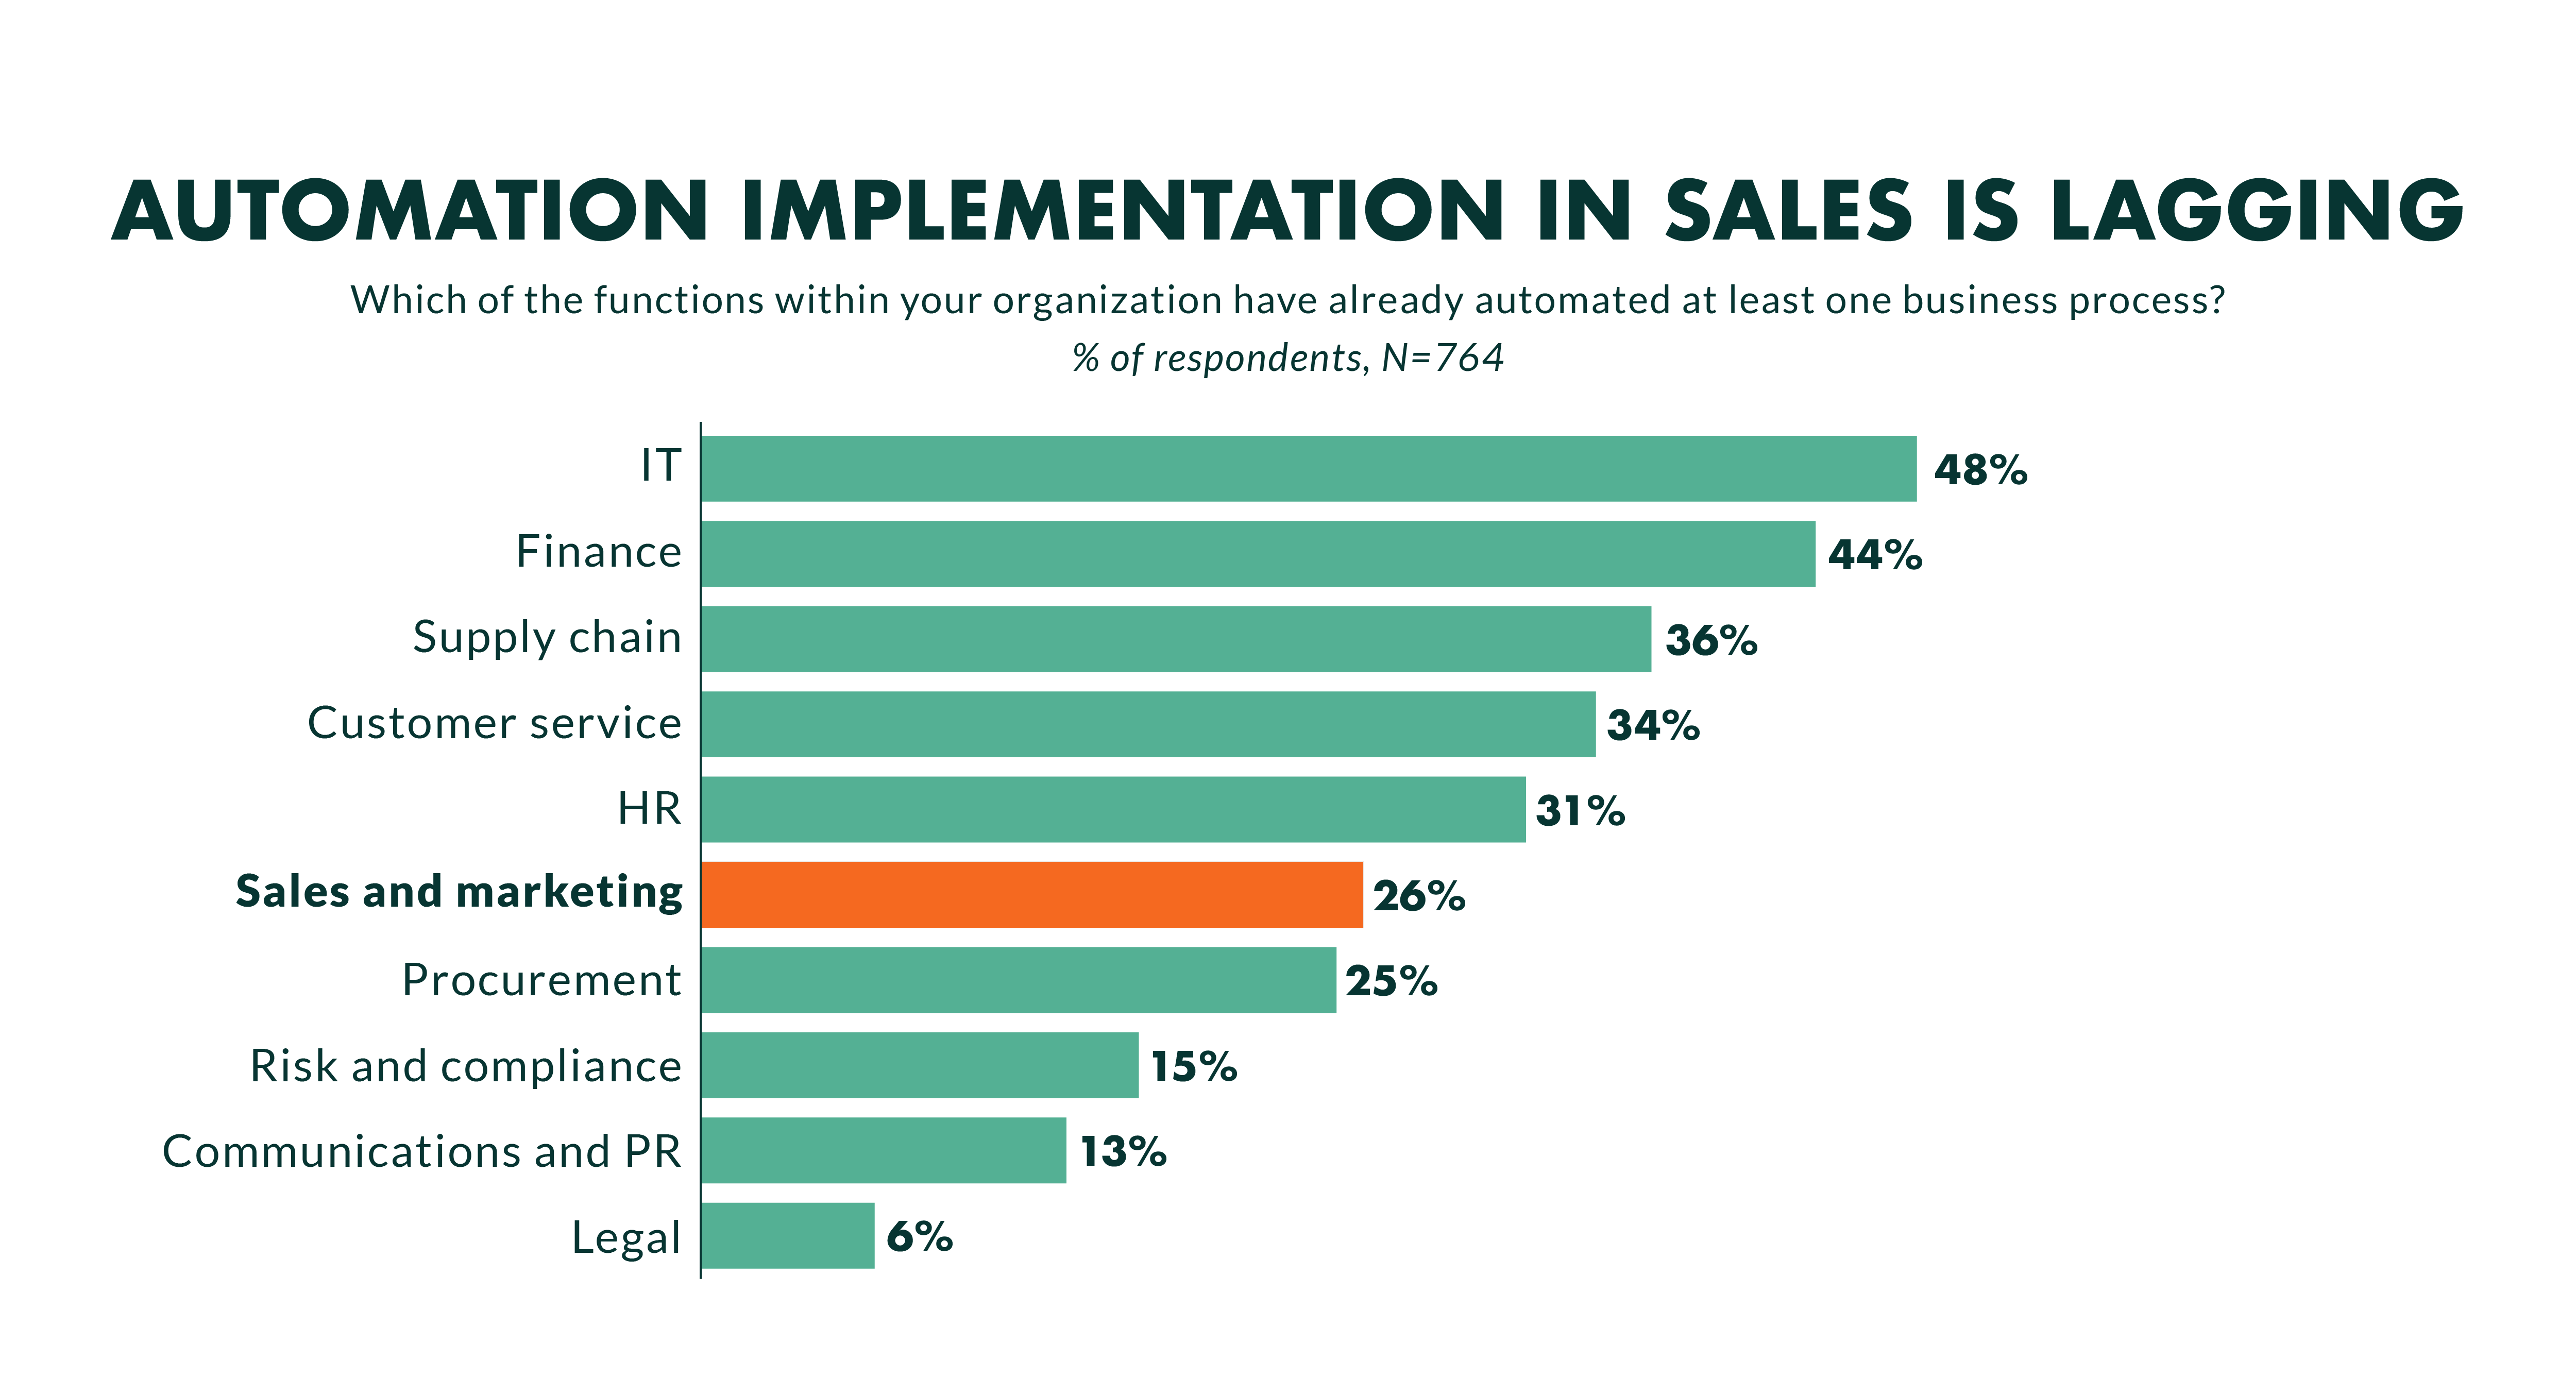 Automation implementation in sales is lagging